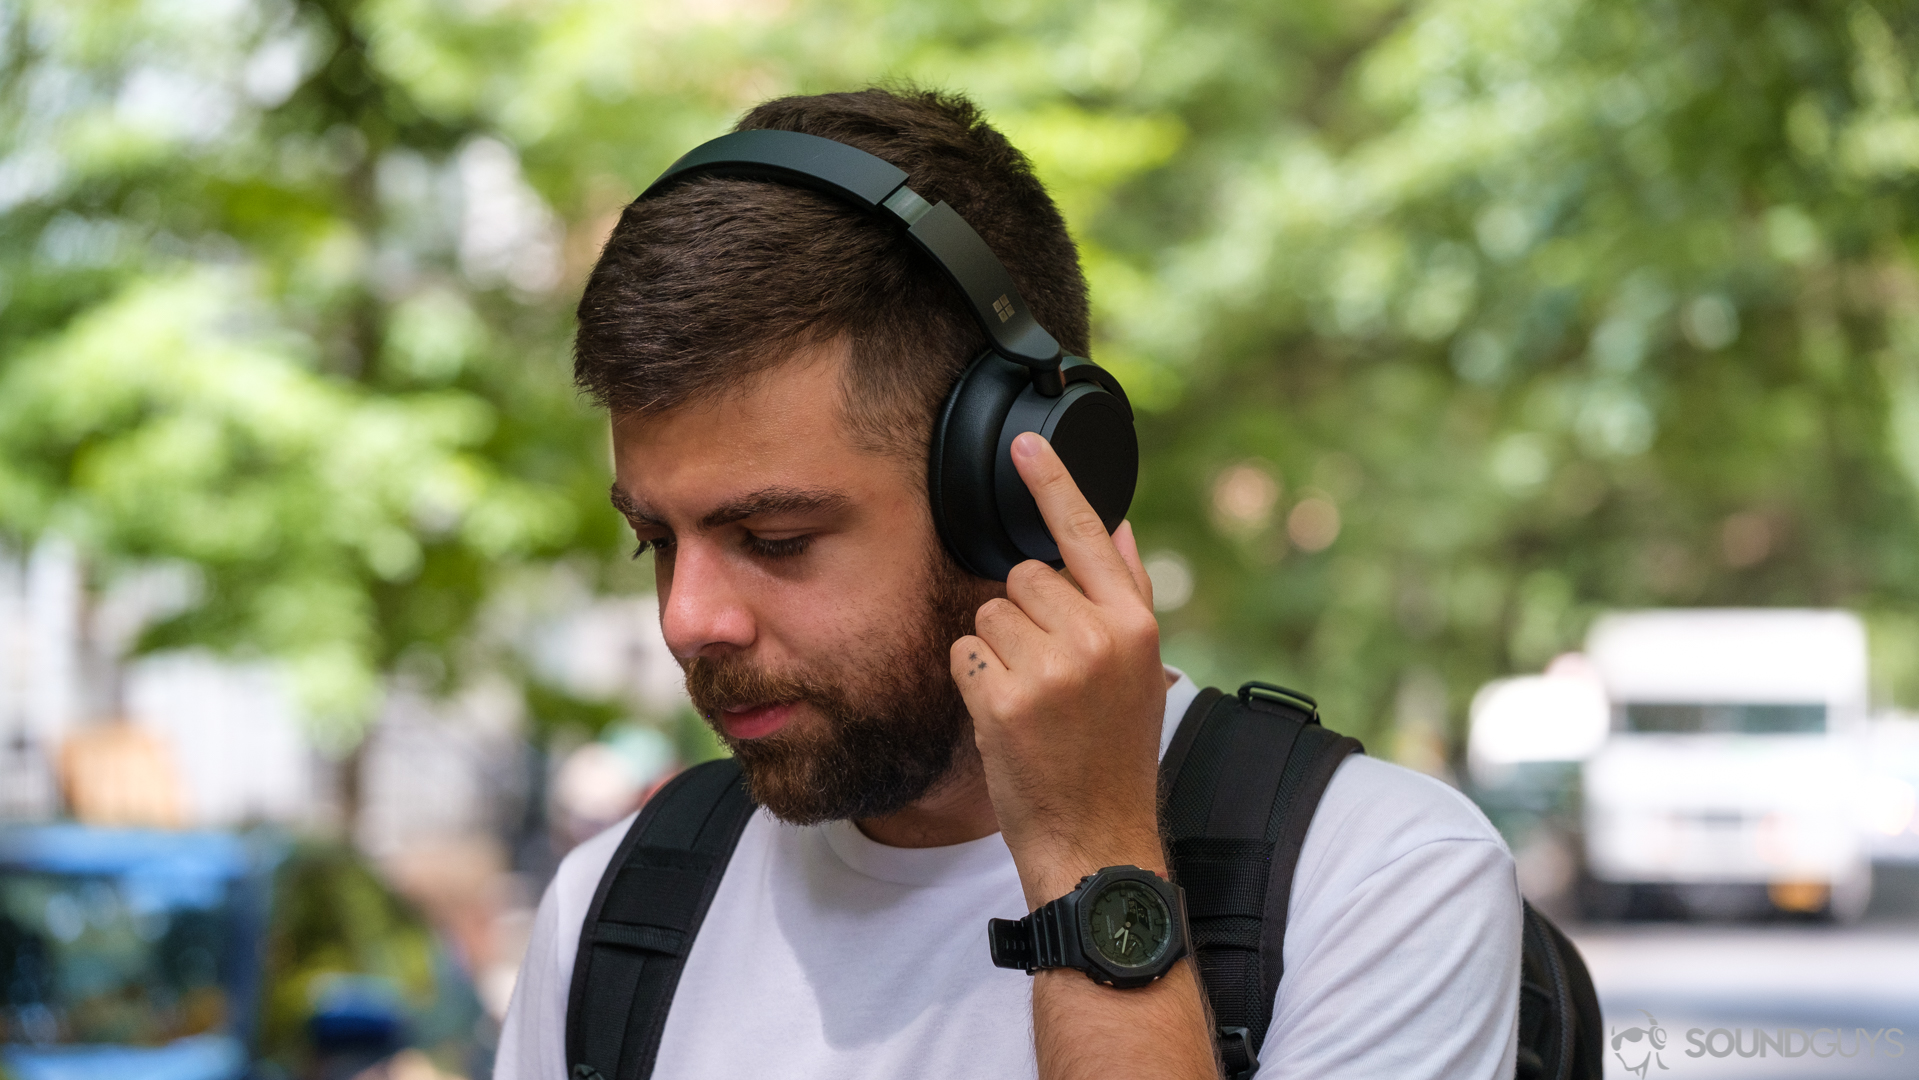 A picture of a man rotating the noise canceling ring on the Microsoft Surface Headphones 2 in front of trees